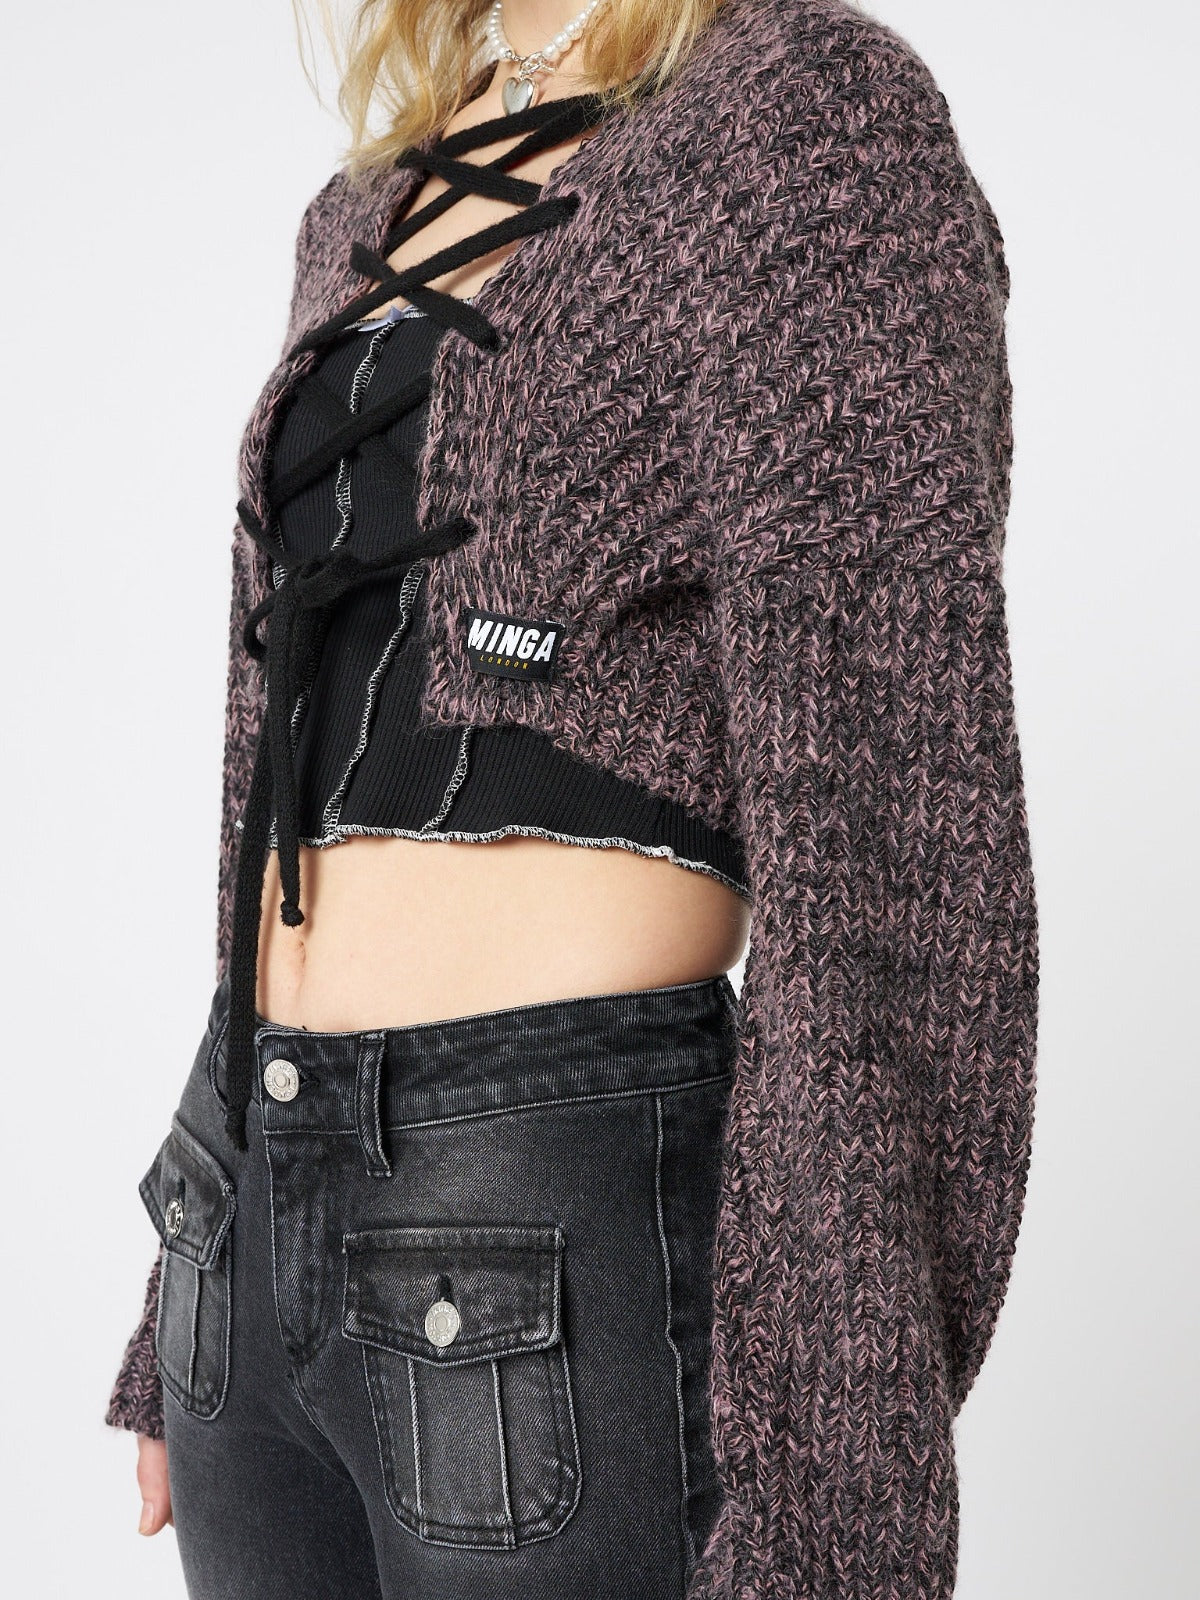 Arabella Mauve Knitted Lace Up Cardigan